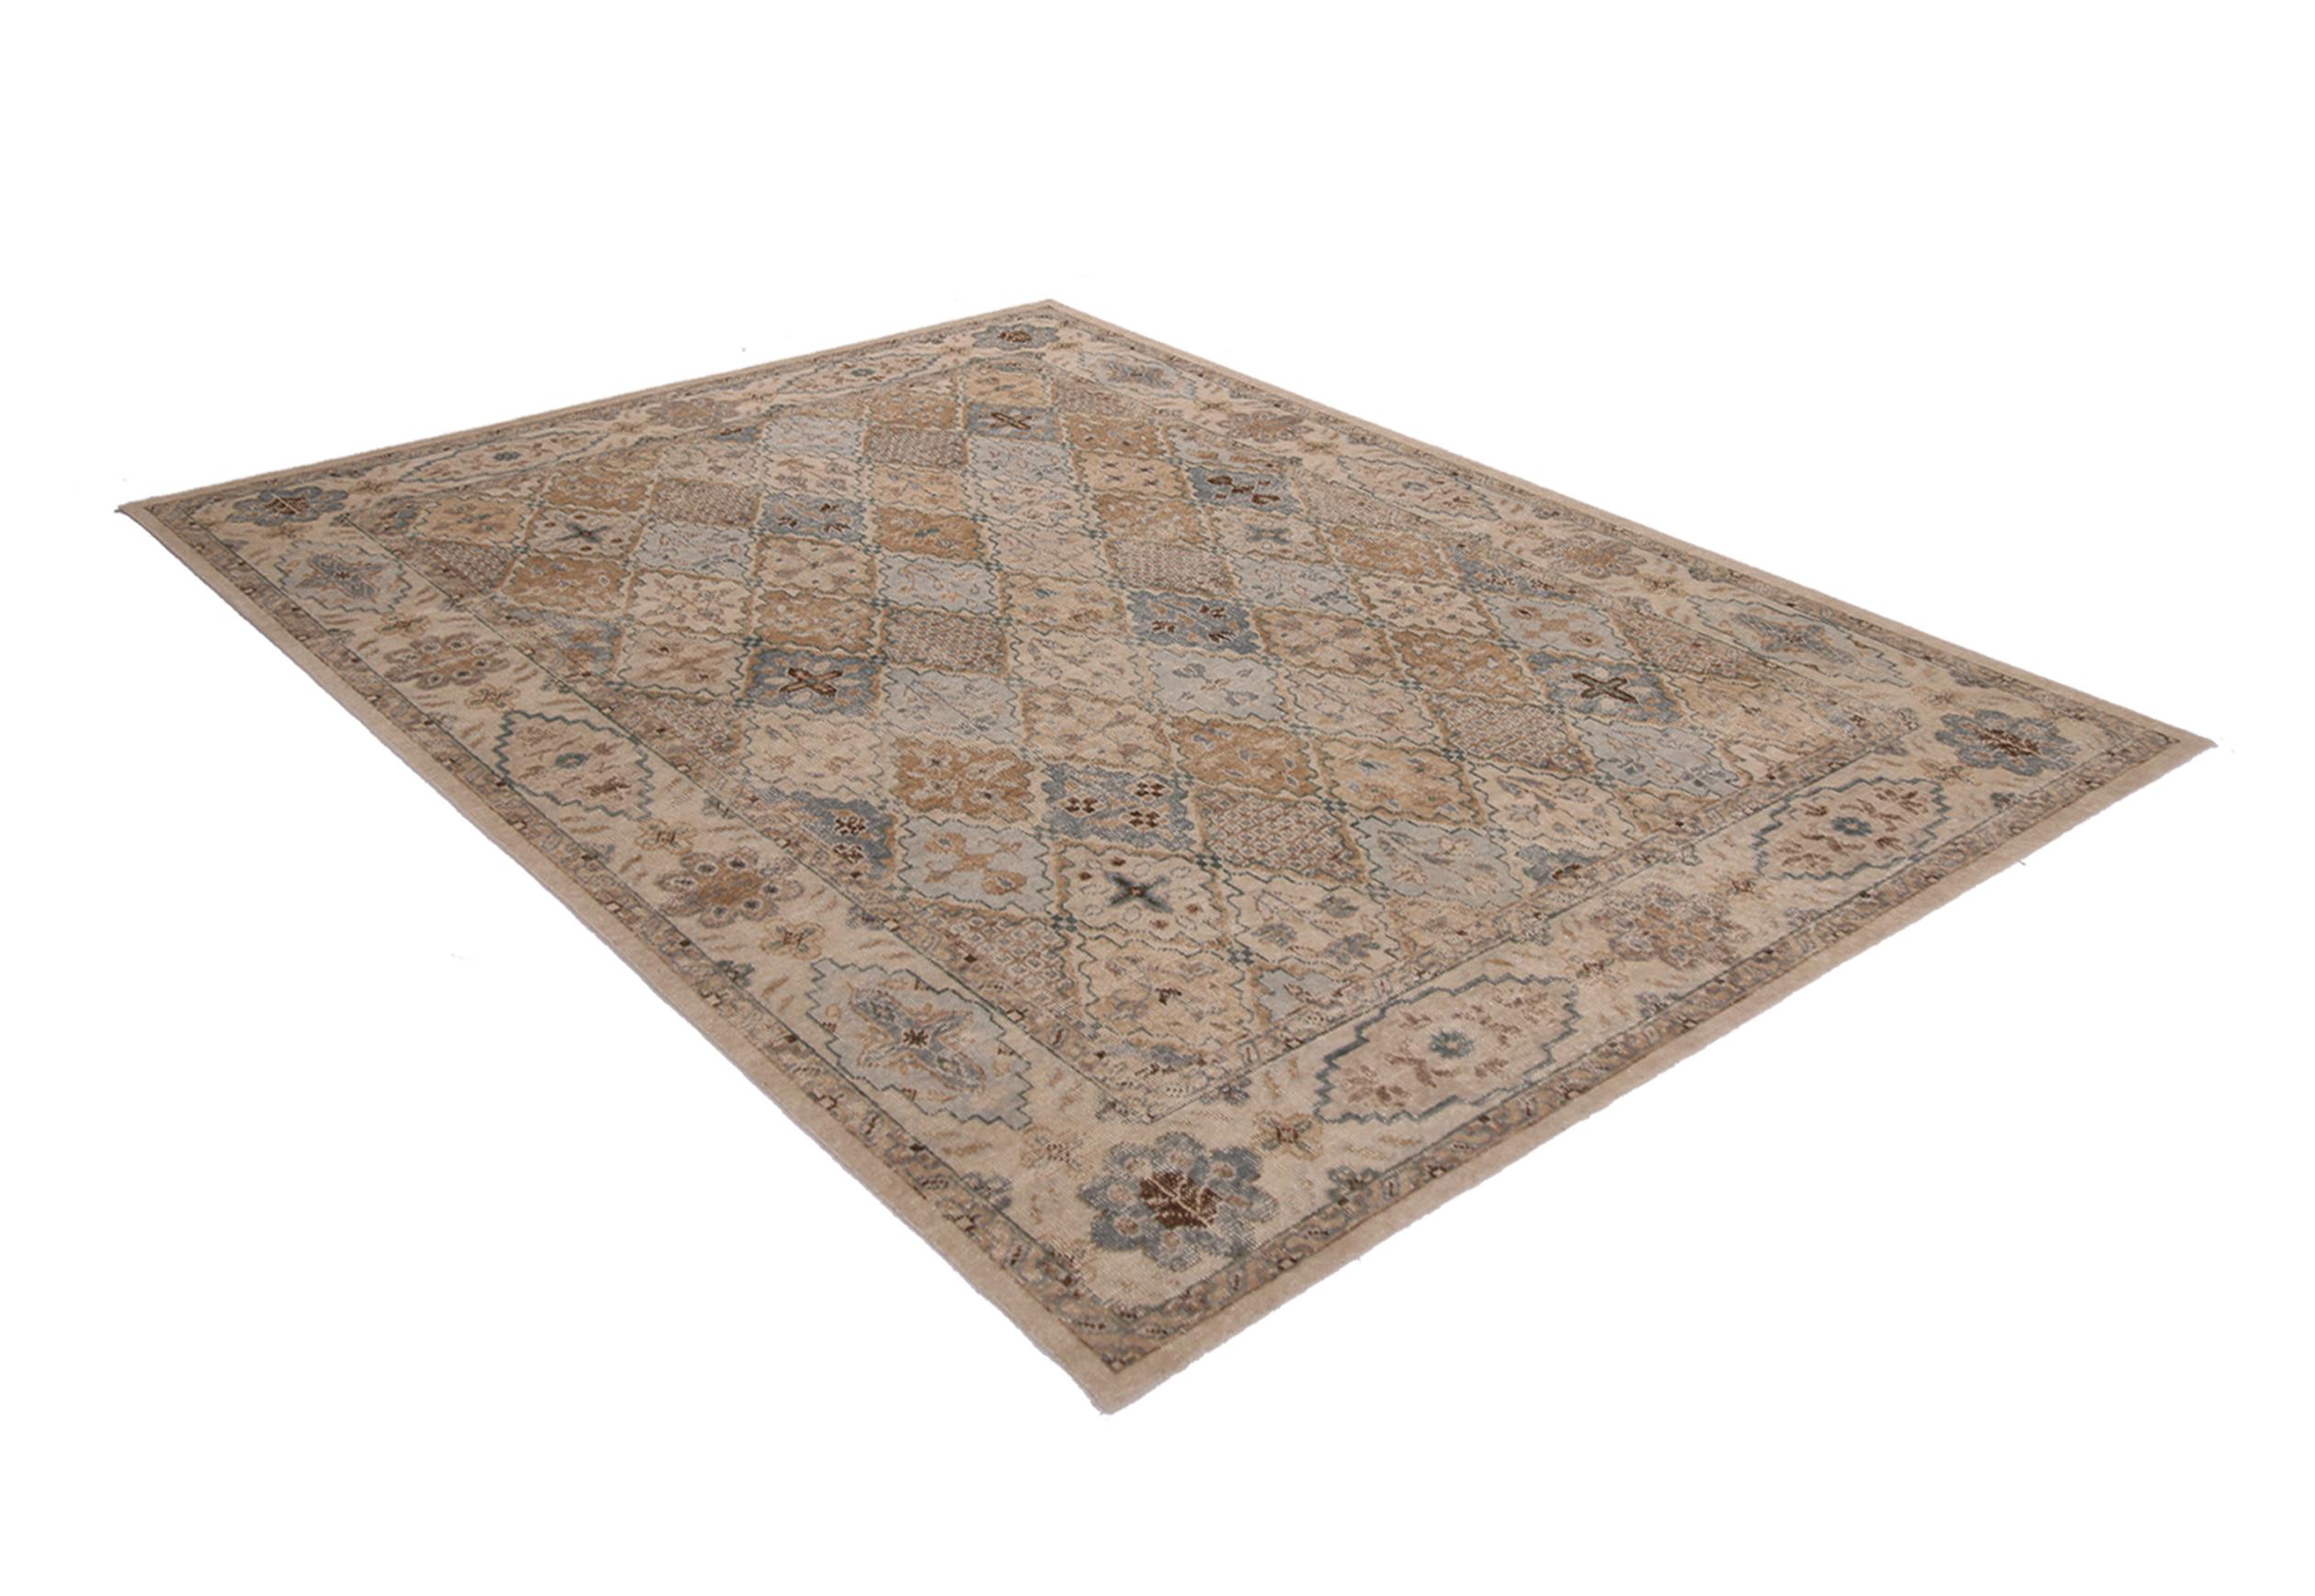 This contemporary Tabriz hand knotted wool rug hails from Rug & Kilim’s Homage collection, enjoying a finer take on distressed shabby chic aesthetic with fewer knots per square inch. The soft gold, blue, and white colorways complement a versatile